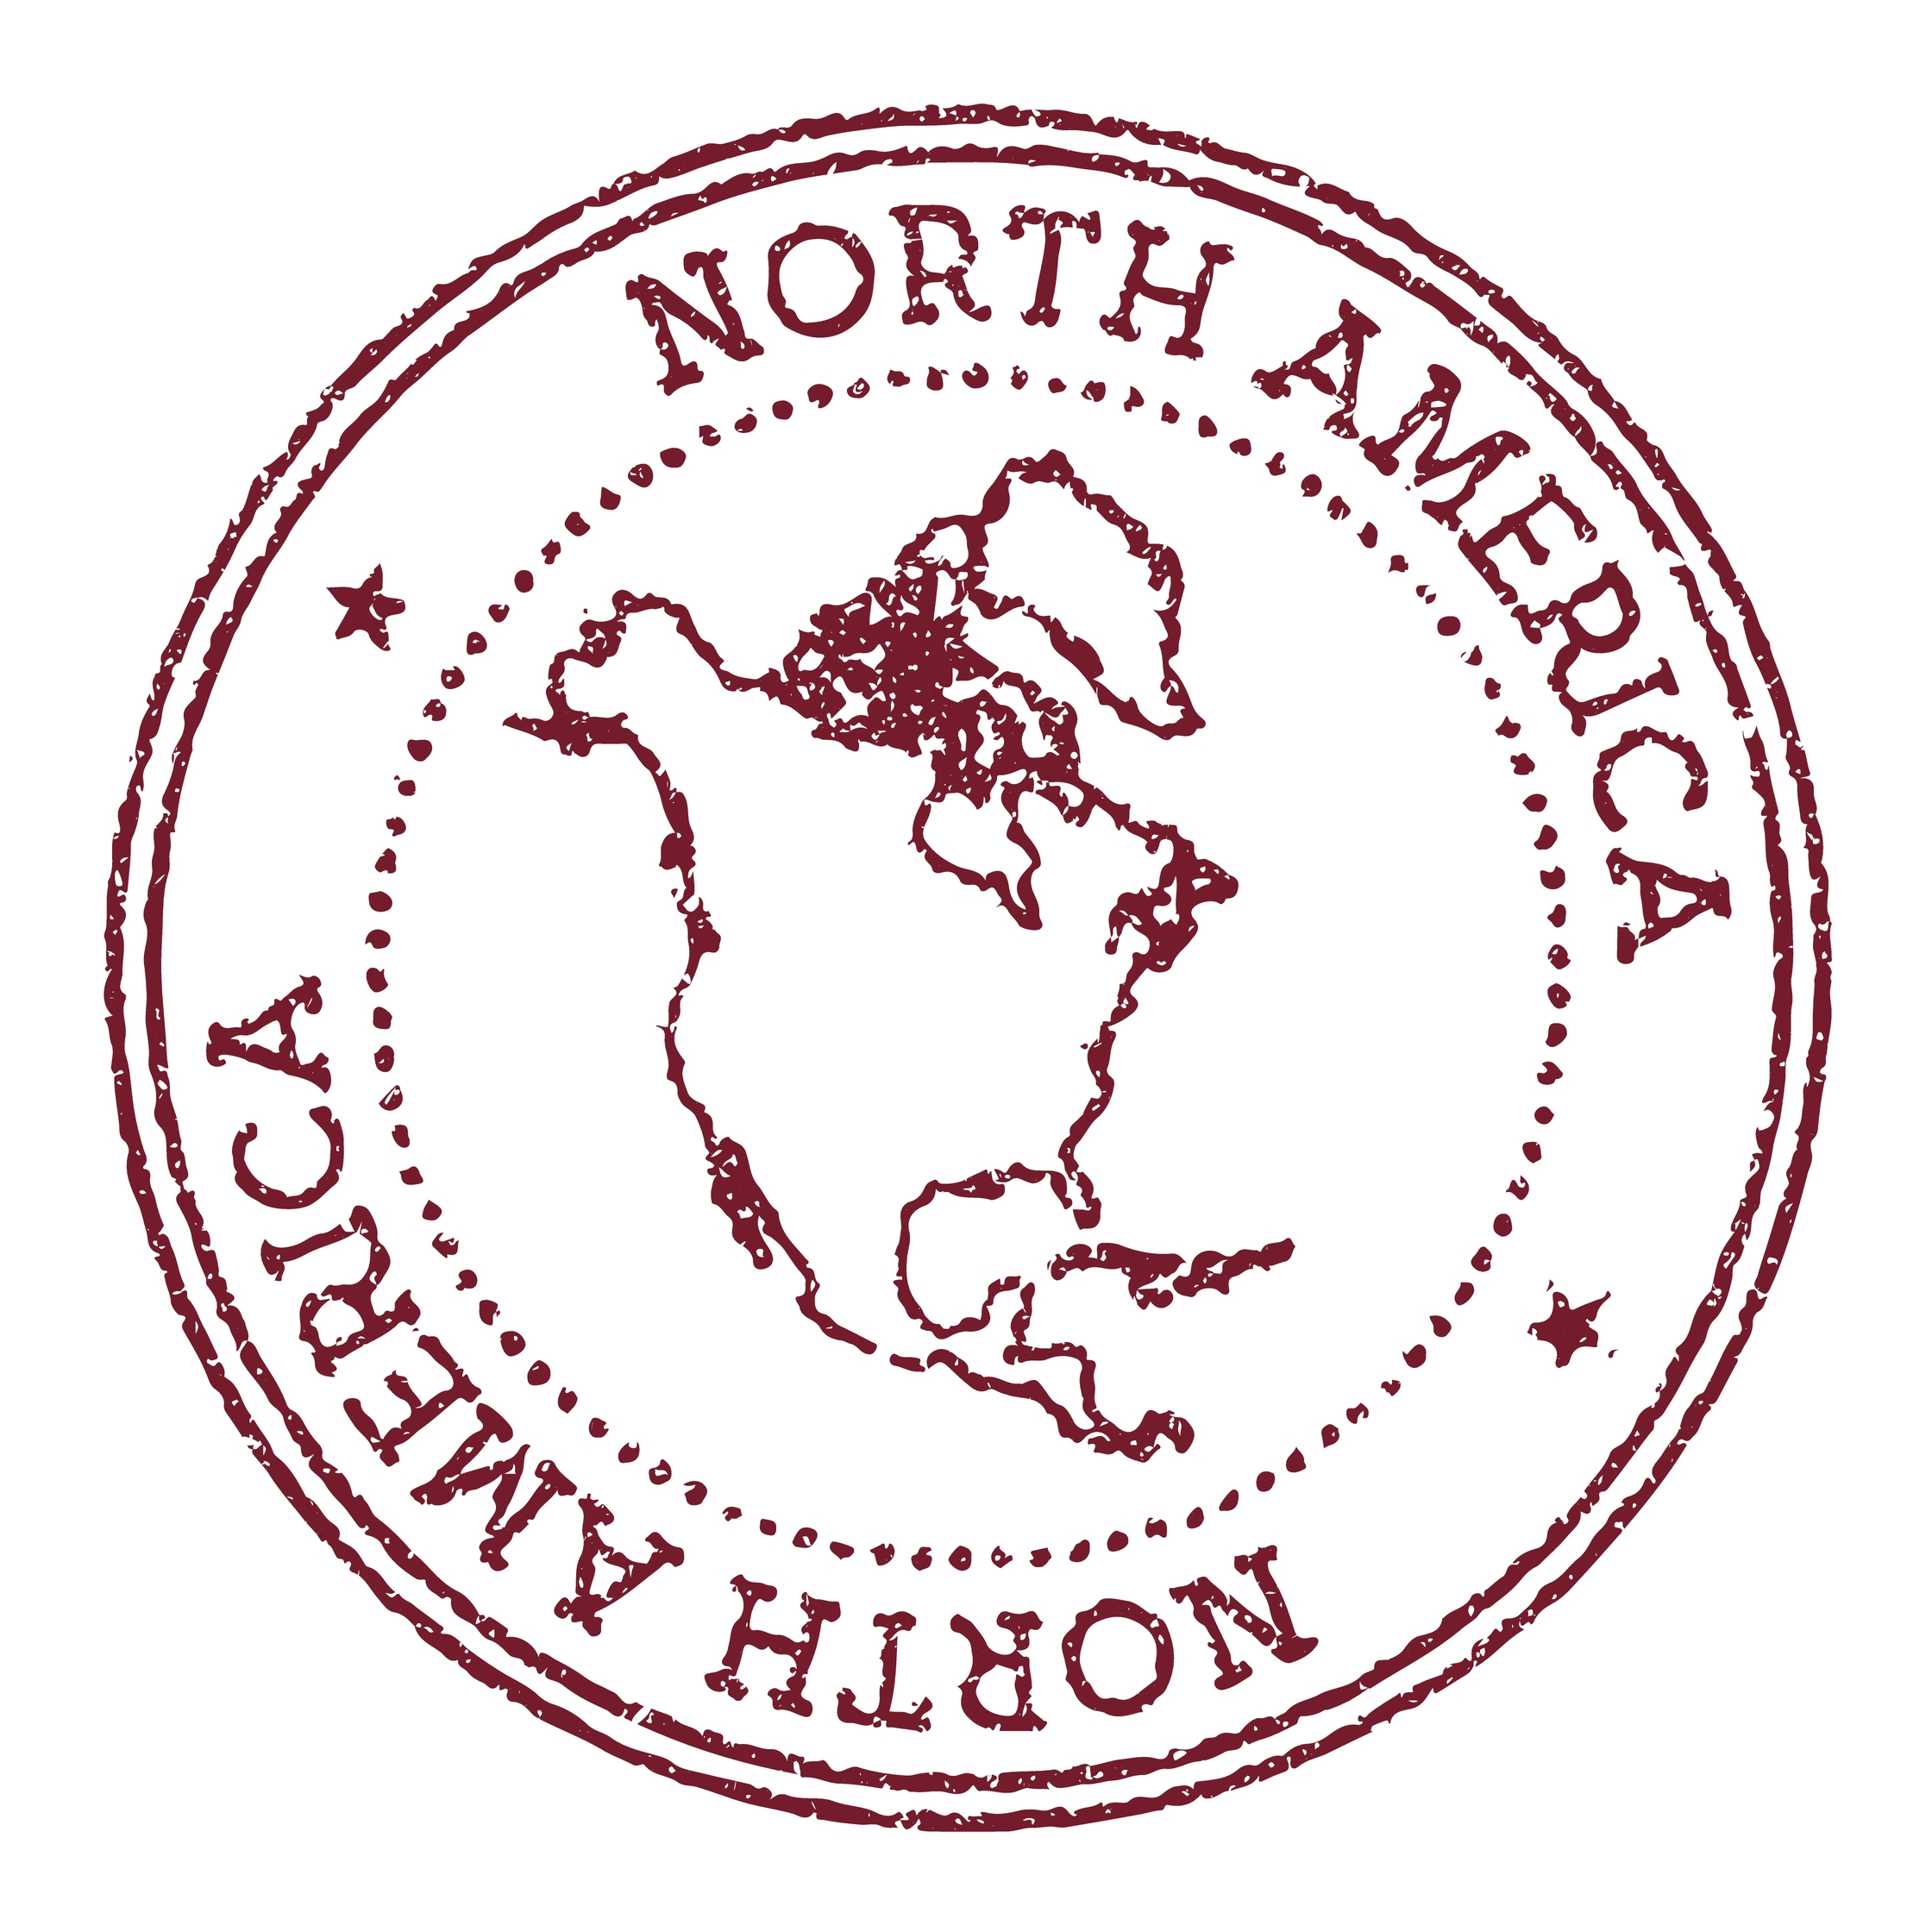 Destinations Round Rubber Postage Stamp, with an outline of the continent in the centre, and the words North America written around the edge of the circle.